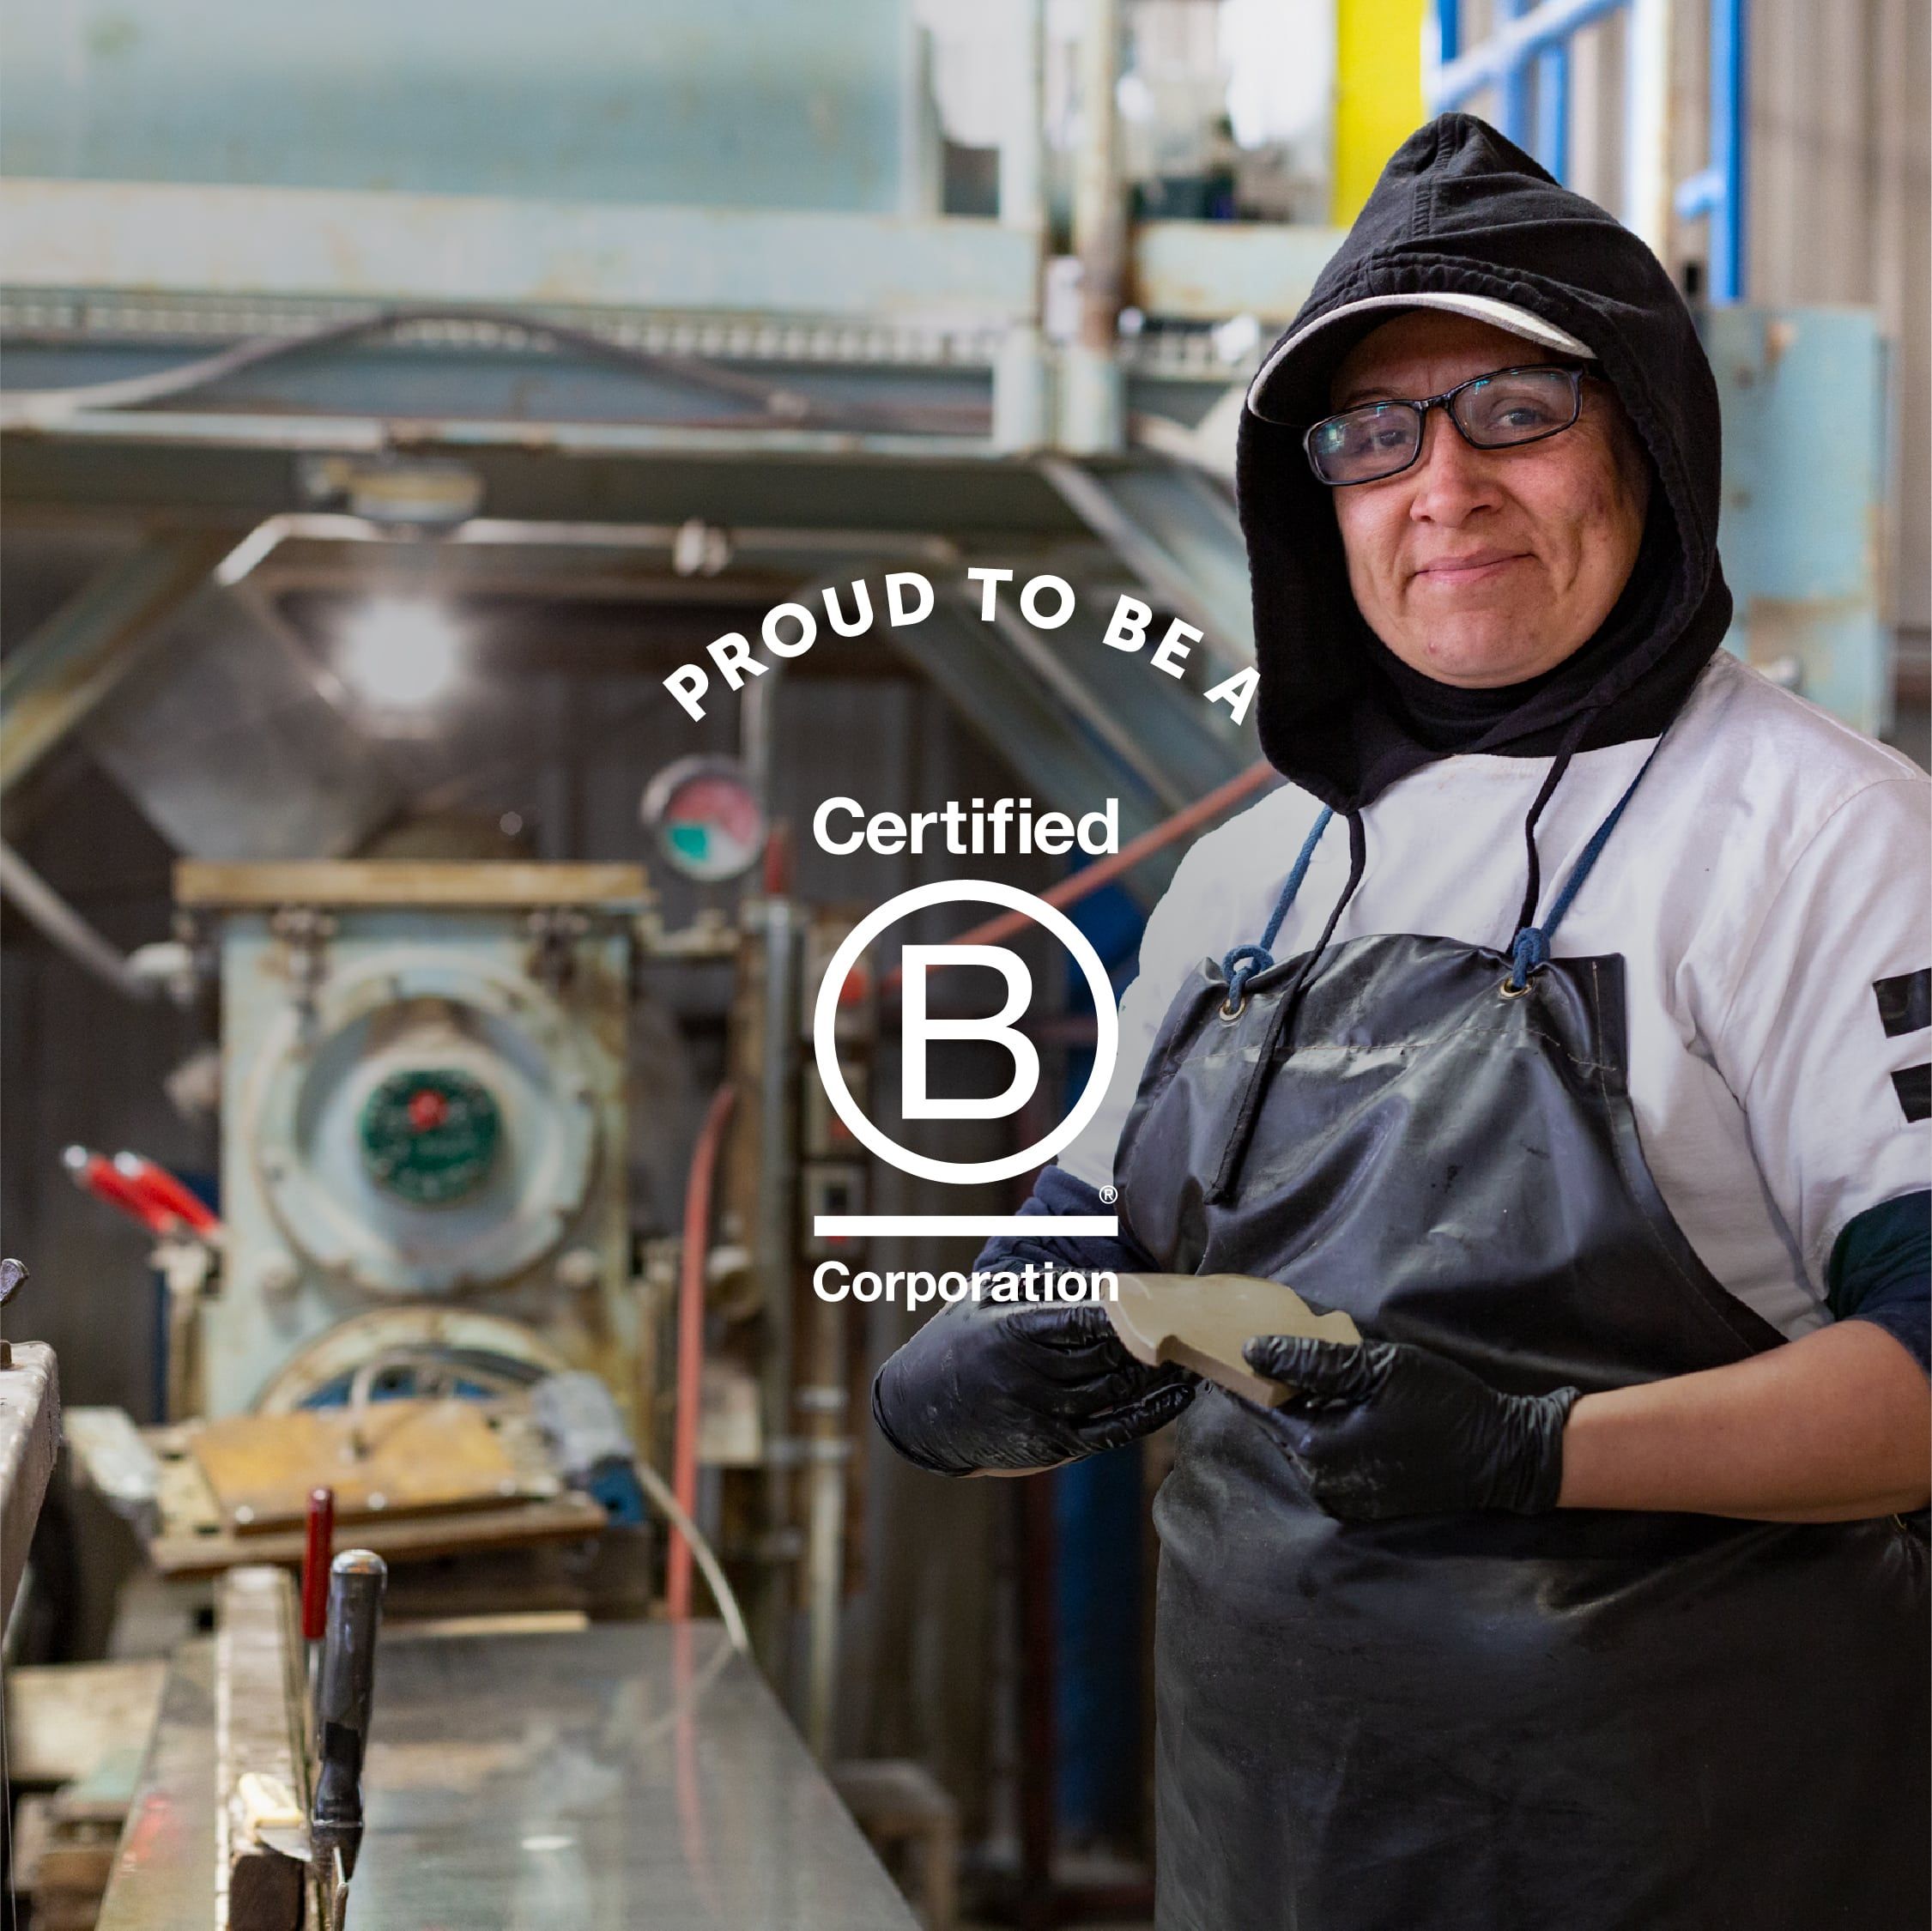 Fireclay Tile is proud to be a B Corp